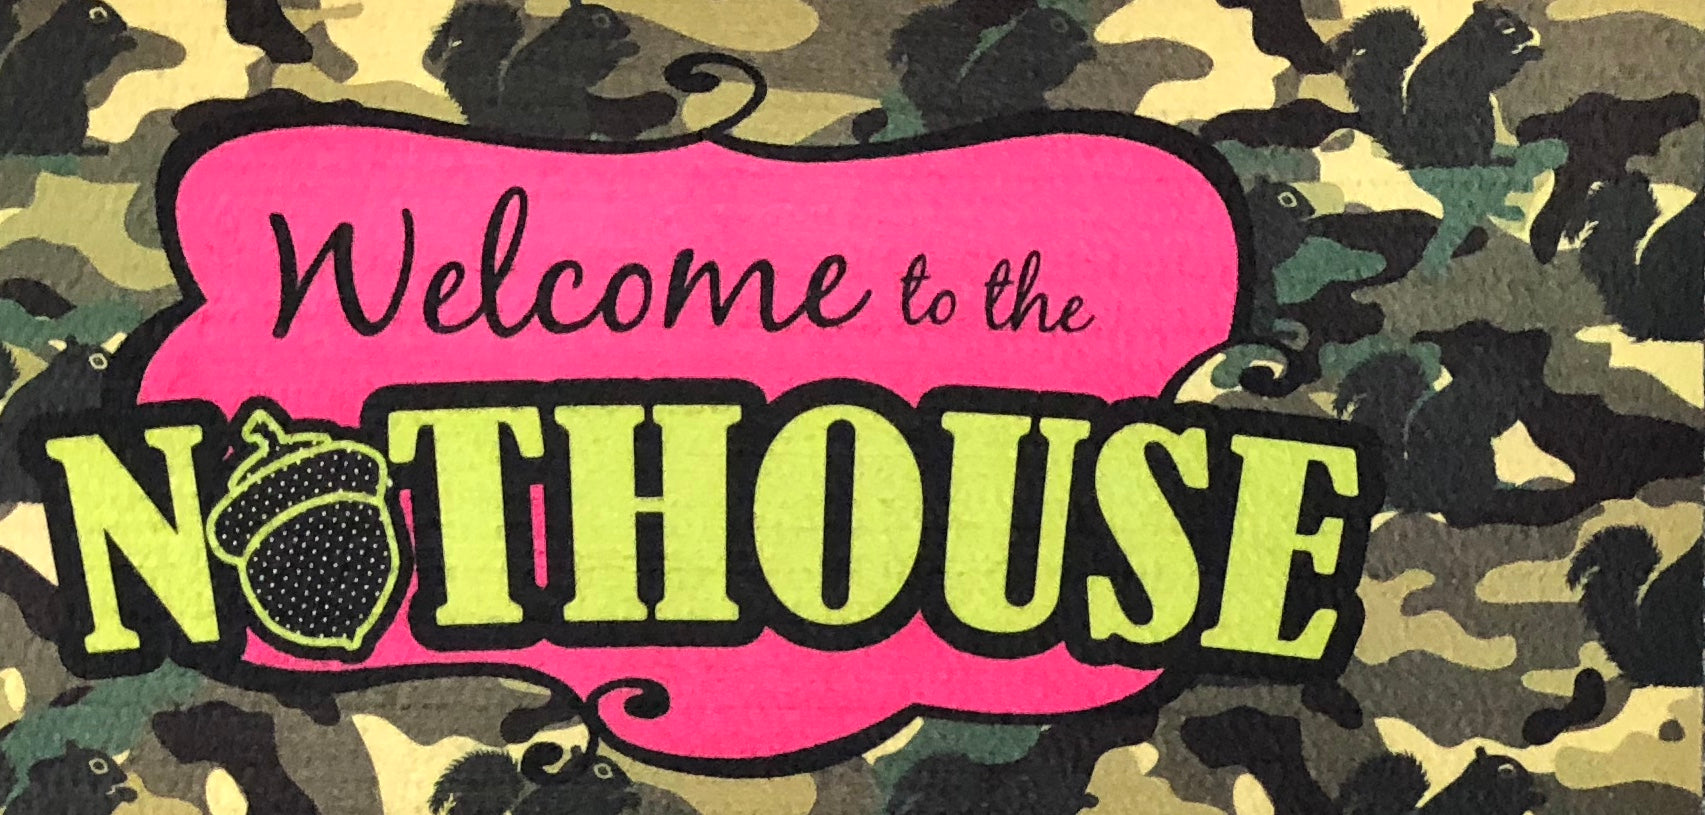 Welcome to the Nut House Mat - Small